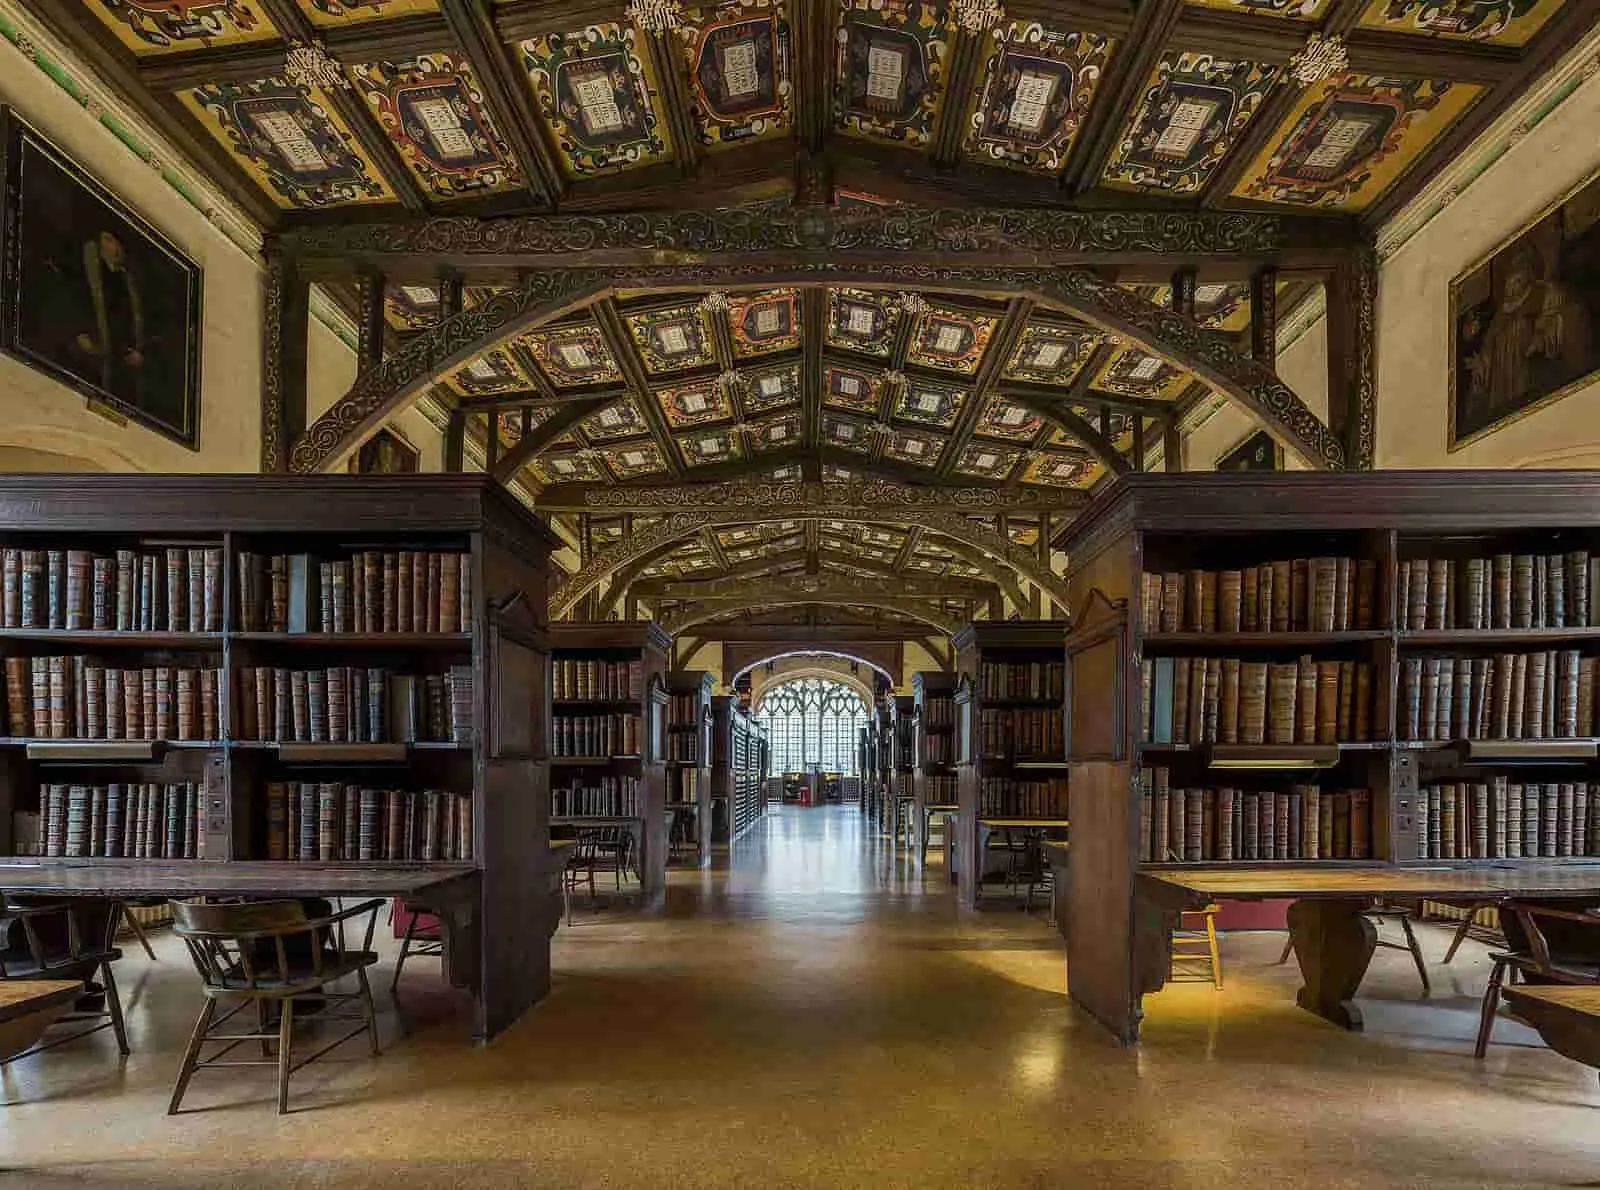 The Bodleian Library interior, in the Duke Humfrey's room, an extravagantly decorated study space.